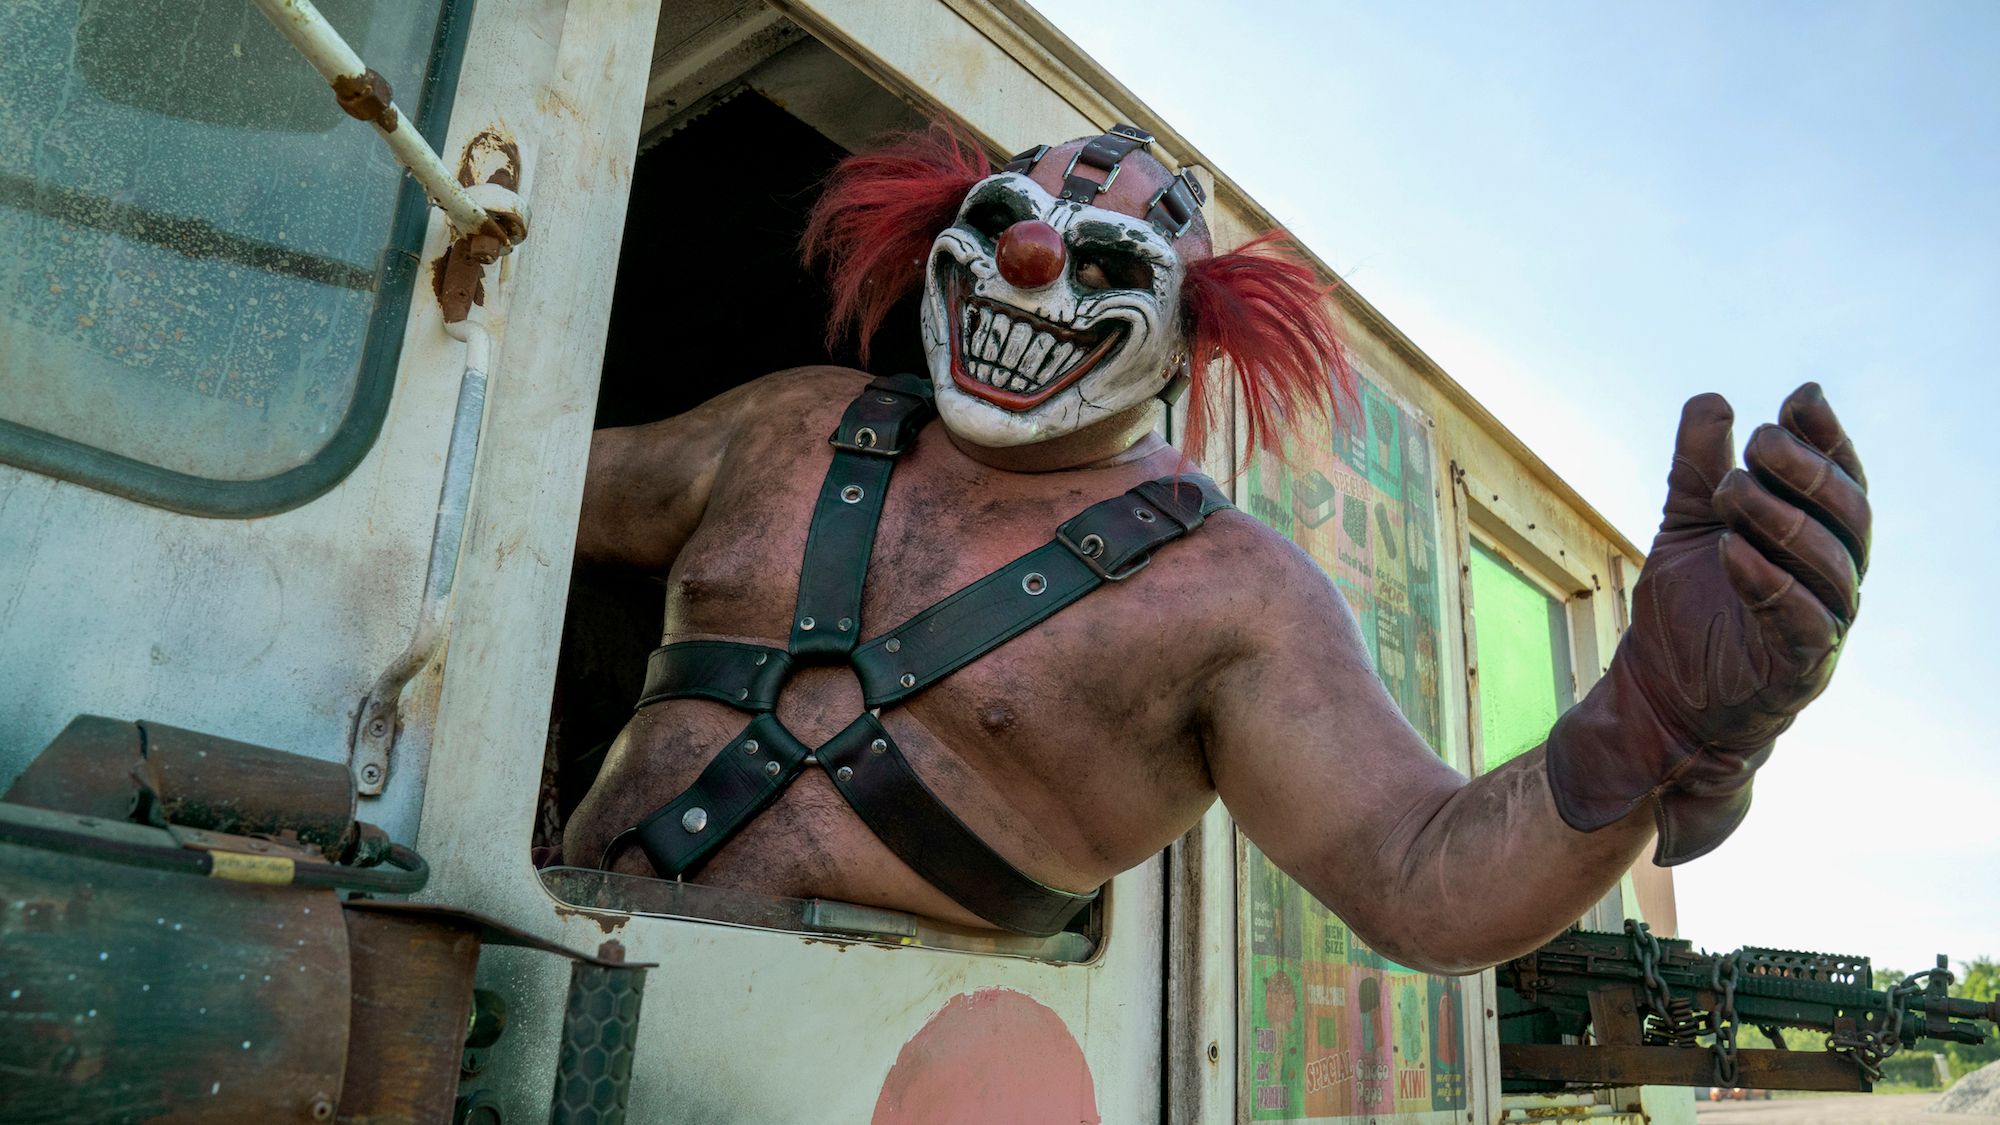 C'mon Hollywood: Why haven't you made a Twisted Metal movie yet?